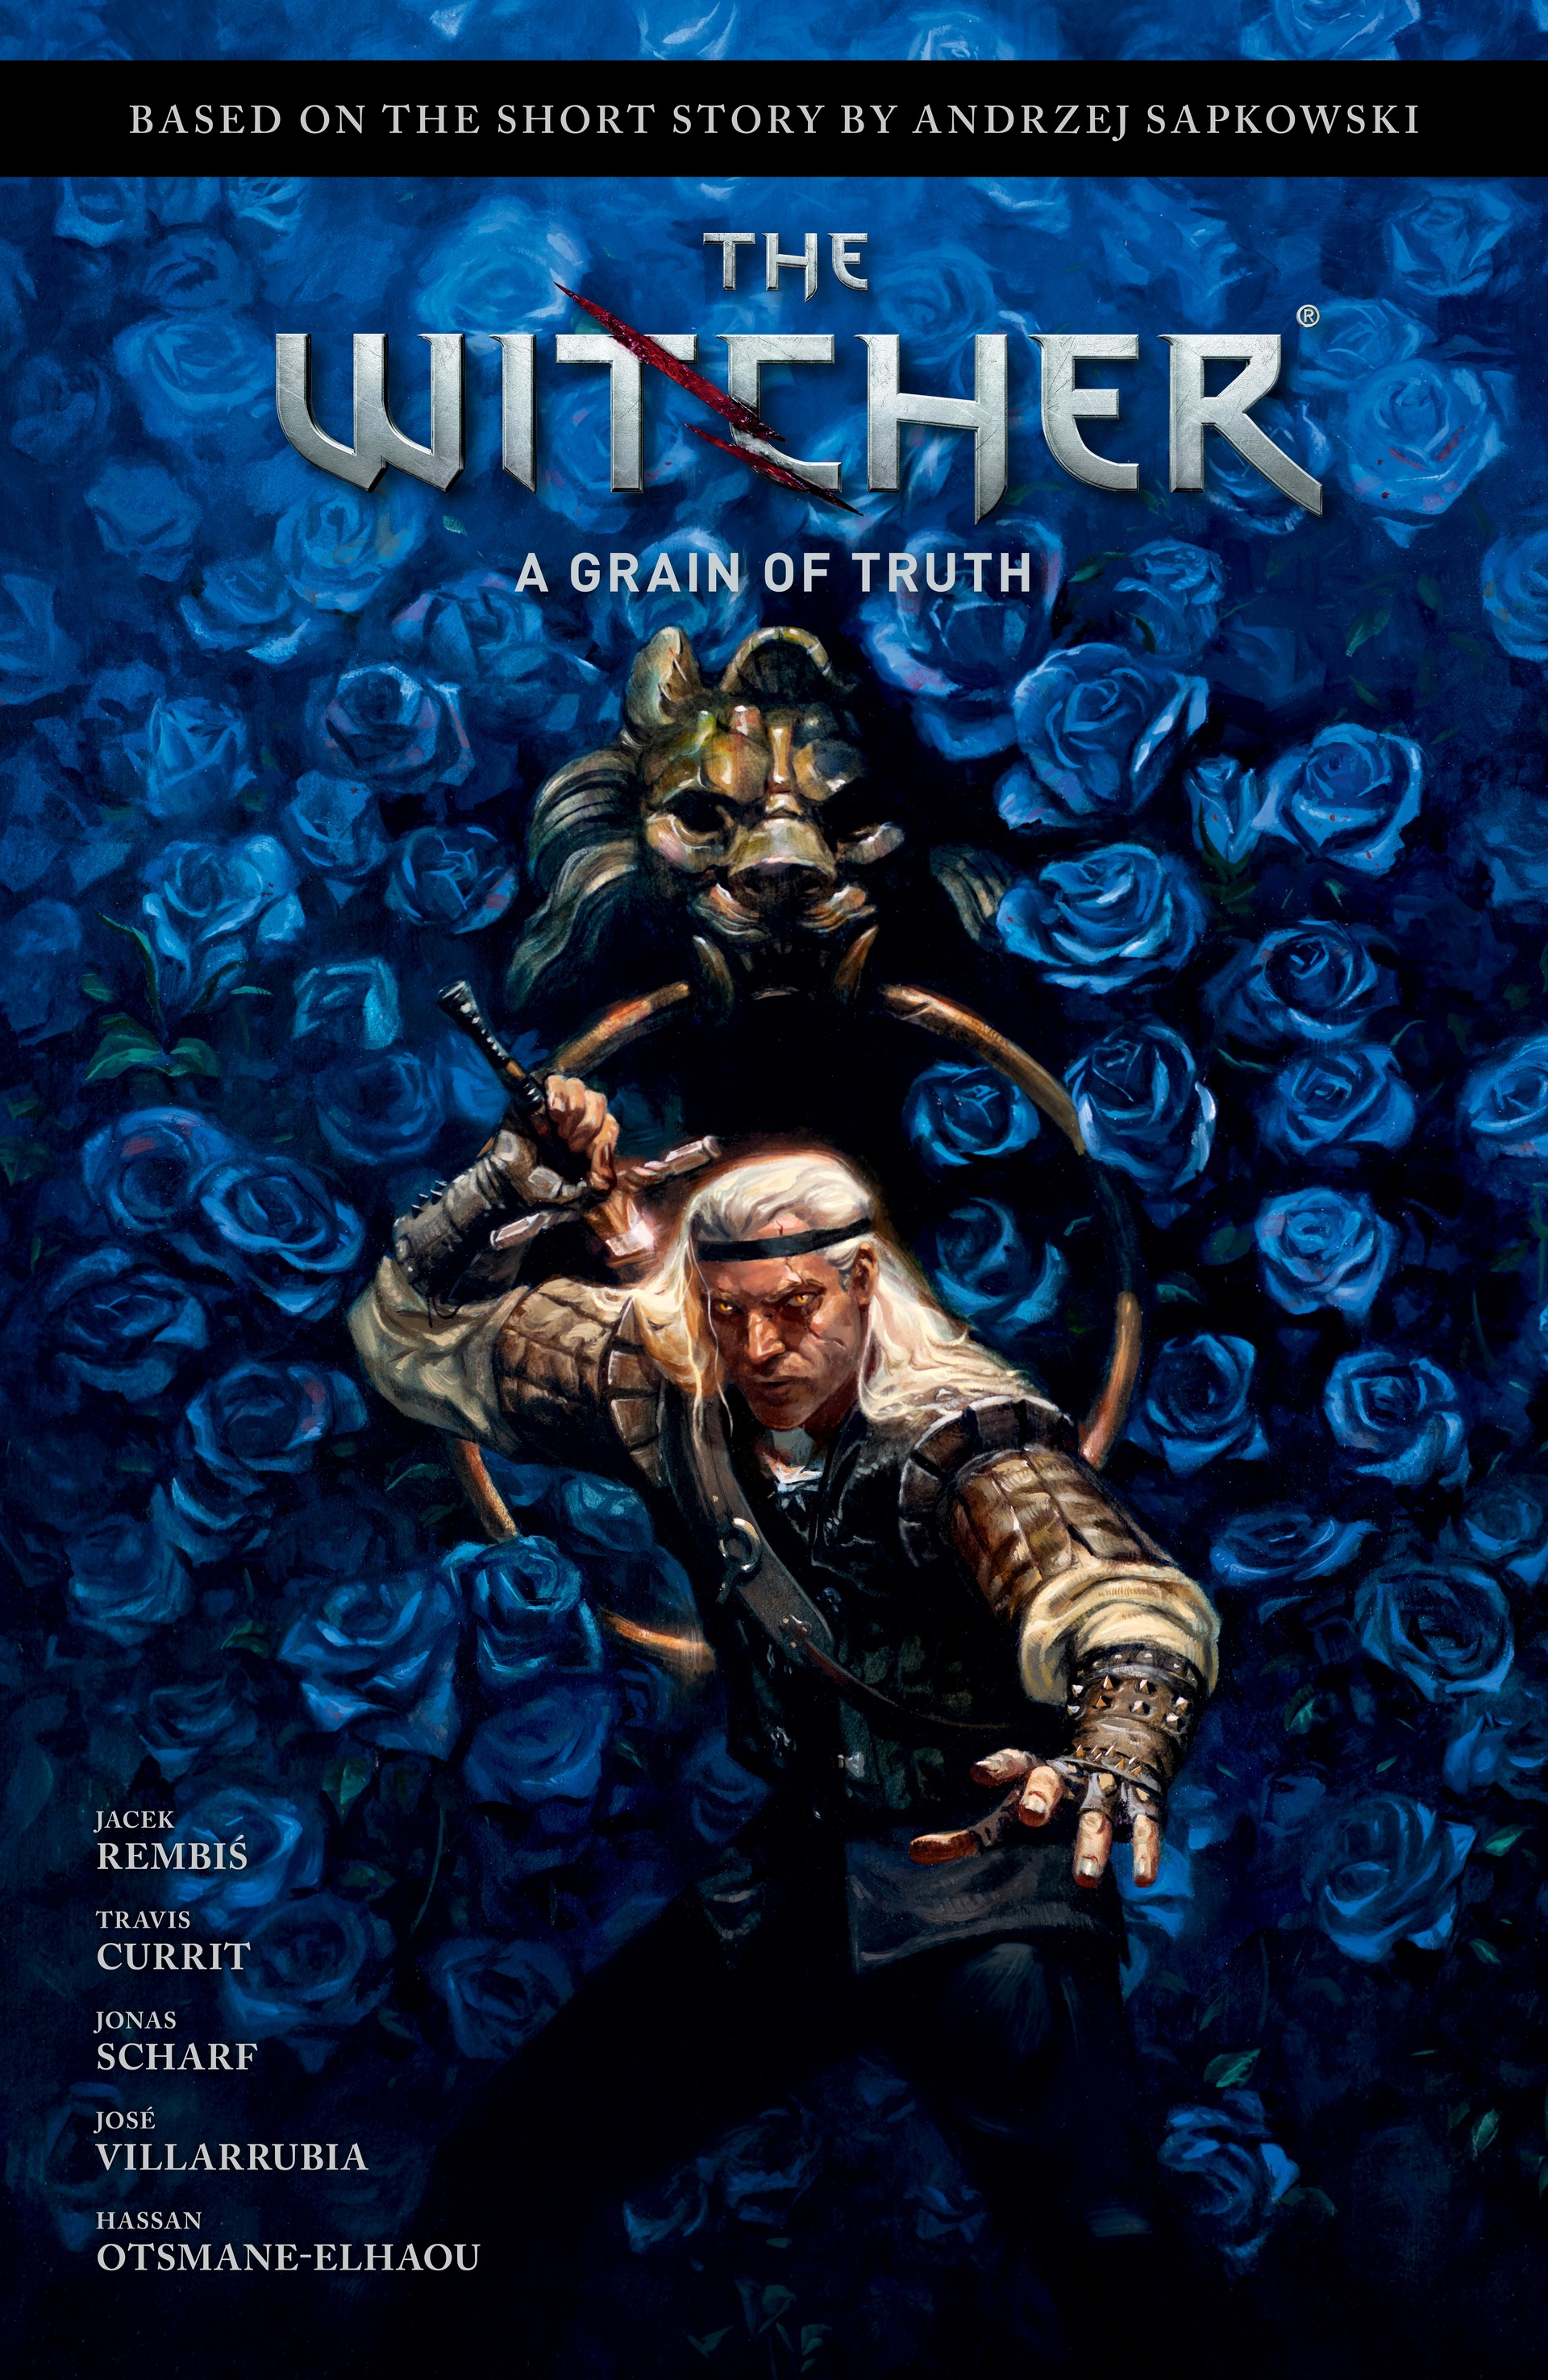 The Witcher: A Grain of Truth Full Page 1